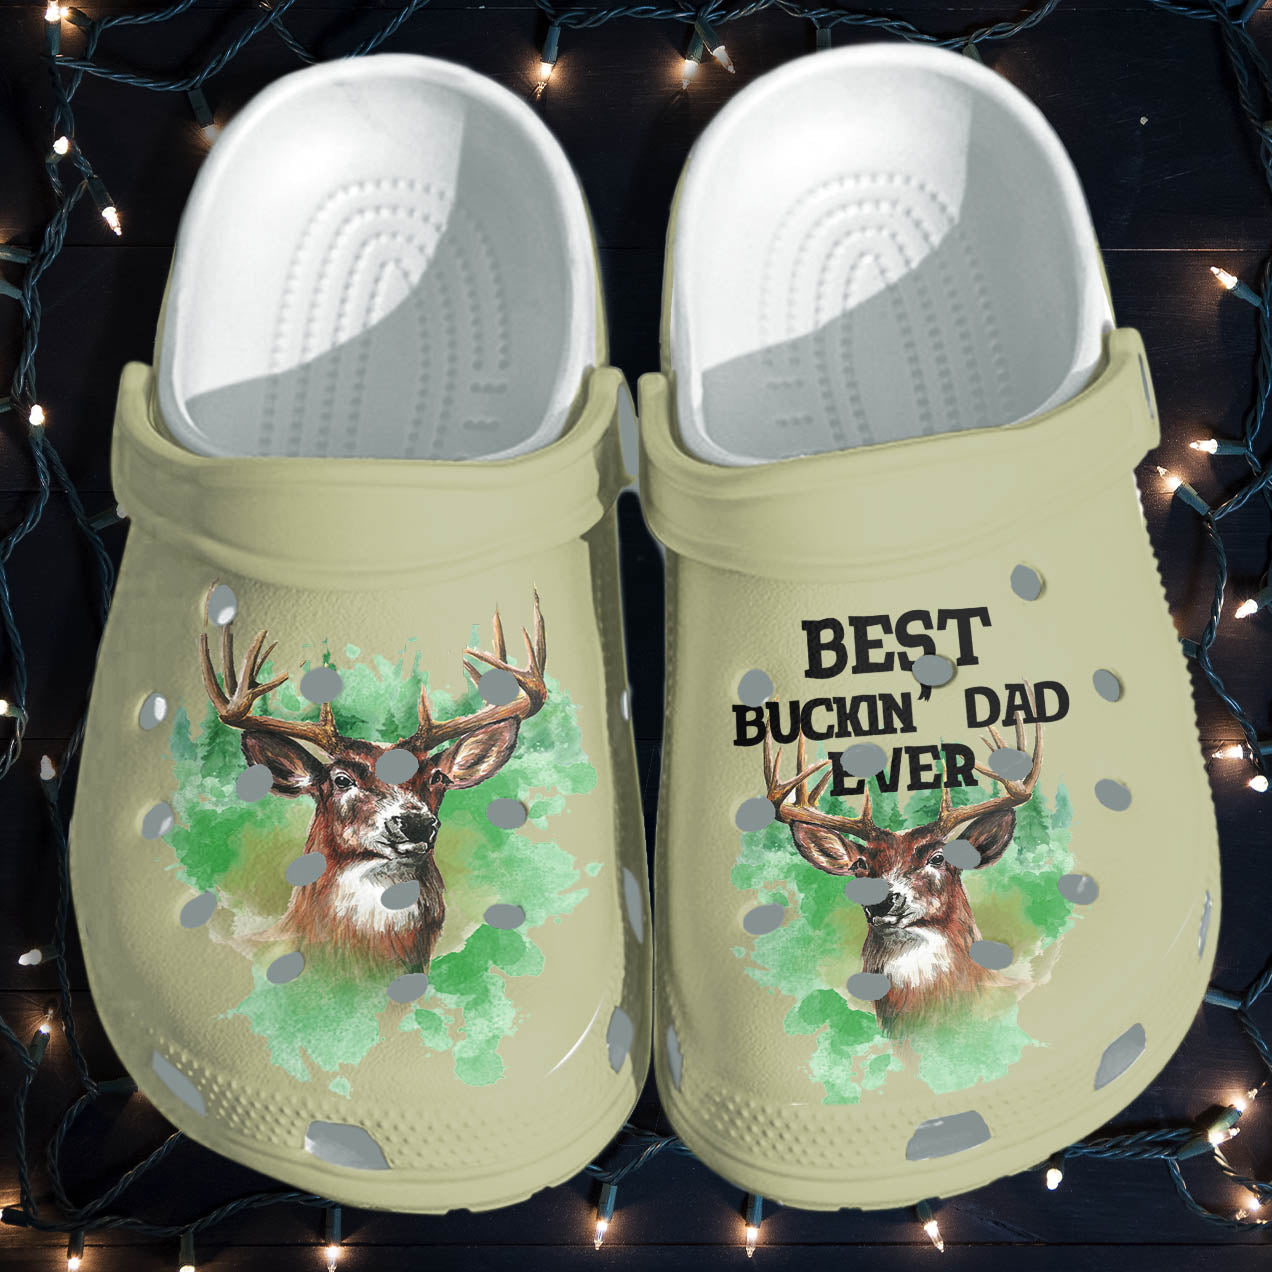 Best Buckin Dad Ever Deer Hunting Camping Deer Hunter Clog Shoes Cute Birthday Gift For Men And Women